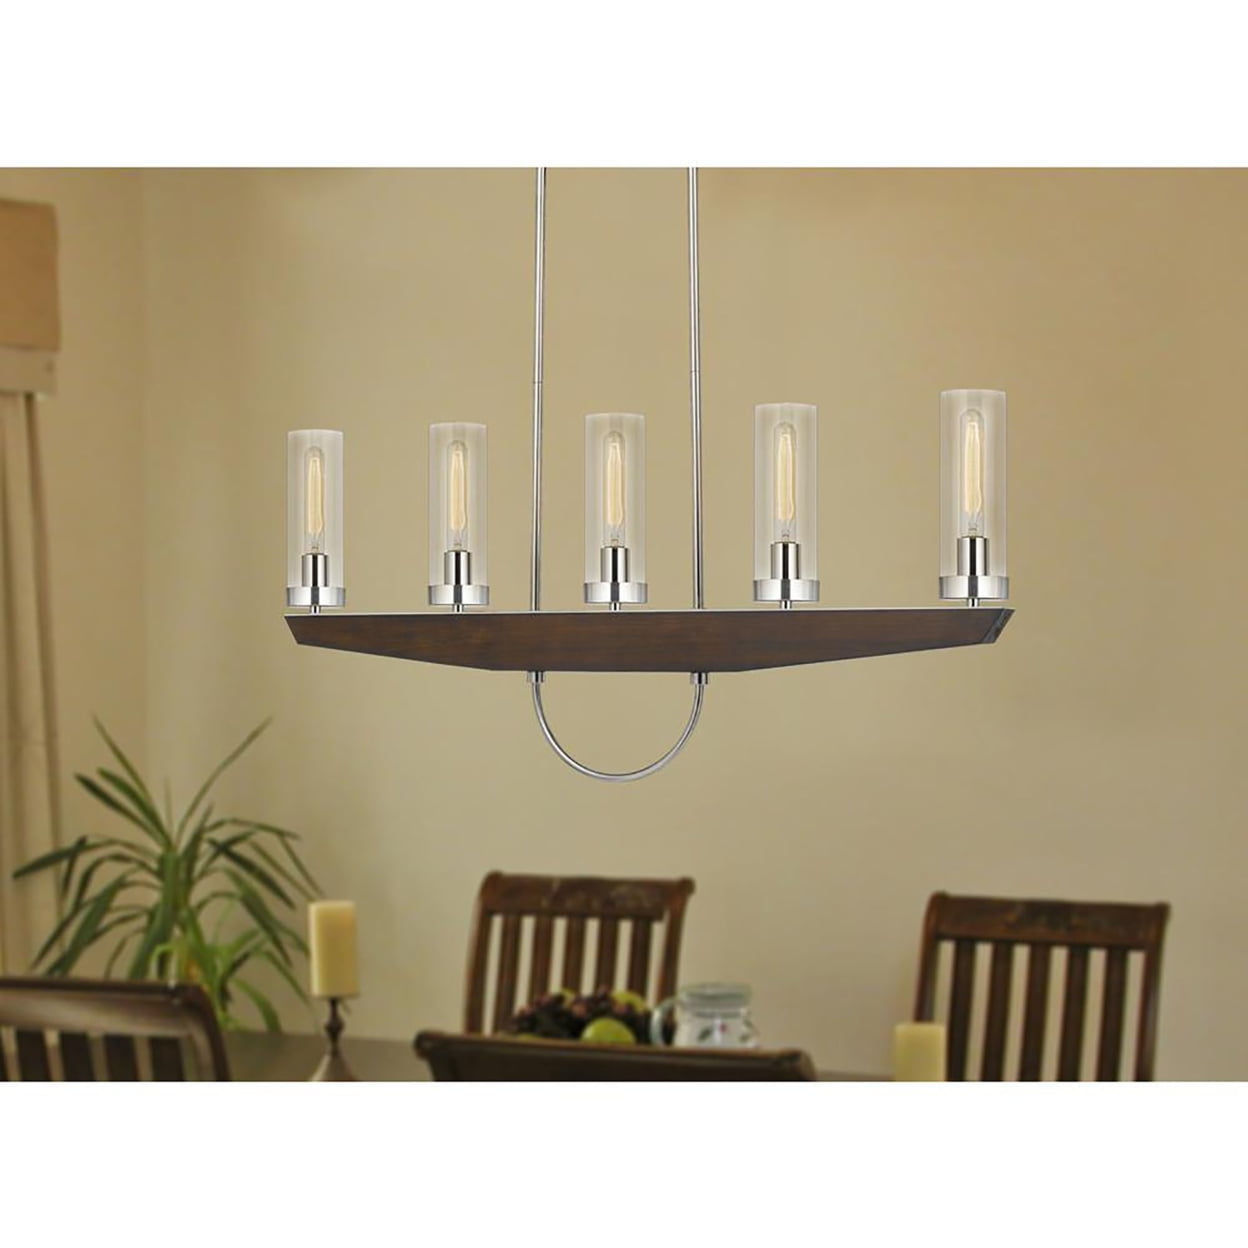 3756-5 60W X5 Ercolano Pine Wood Metal Island Chandelier with Clear Glass Shade -  Cal Lighting, FX-3756-5